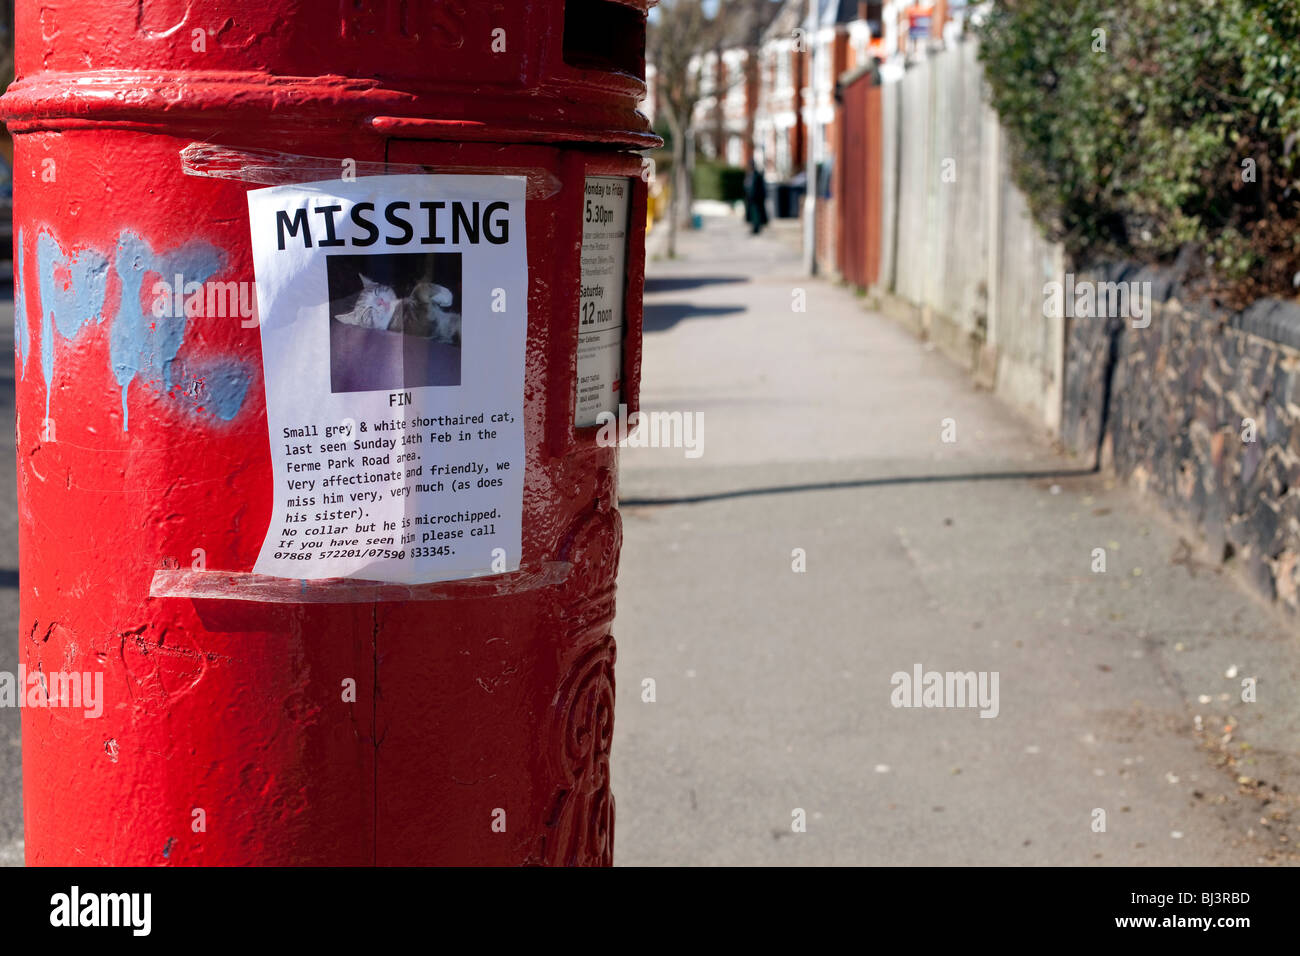 Missing pet poster. Stock Photo